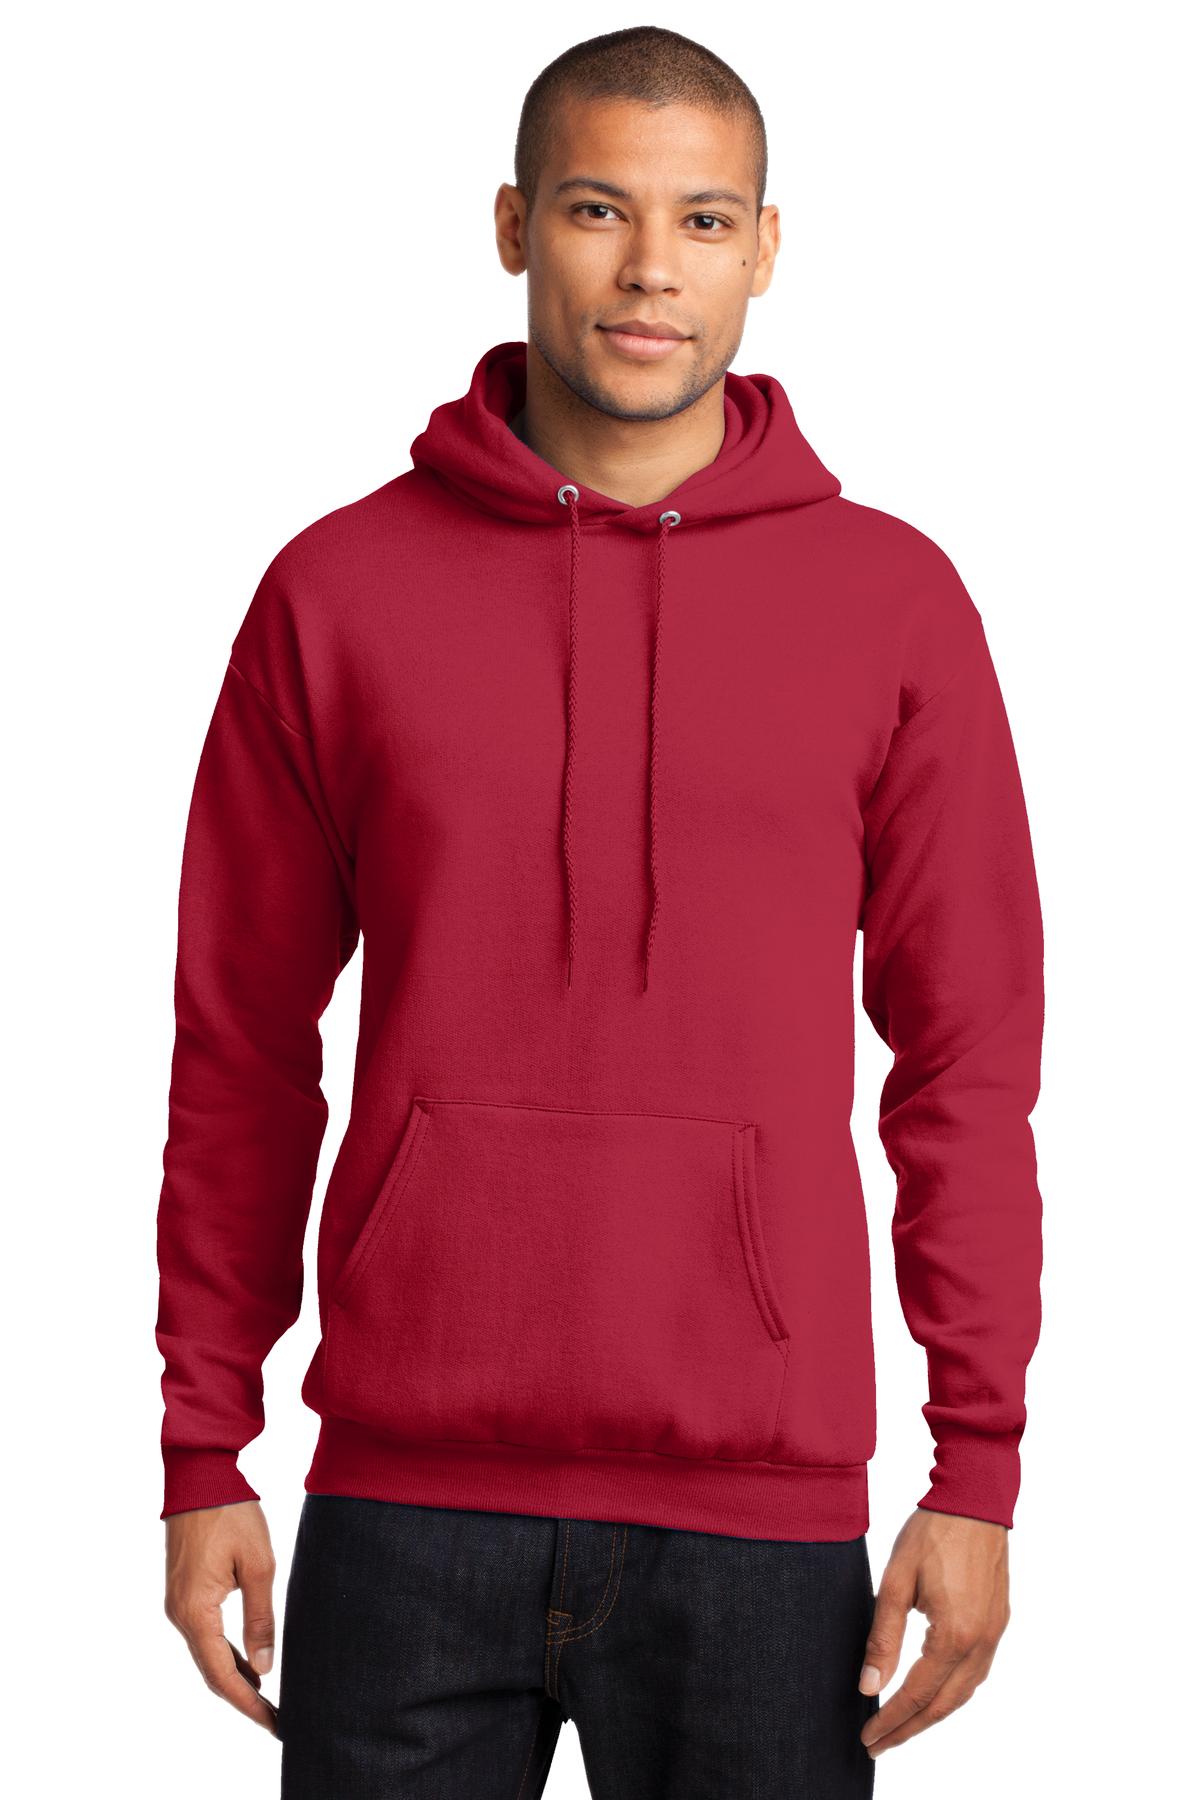 Port & Company® - Core Fleece Pullover Hooded Sweatshirt. PC78H [Red] - DFW Impression